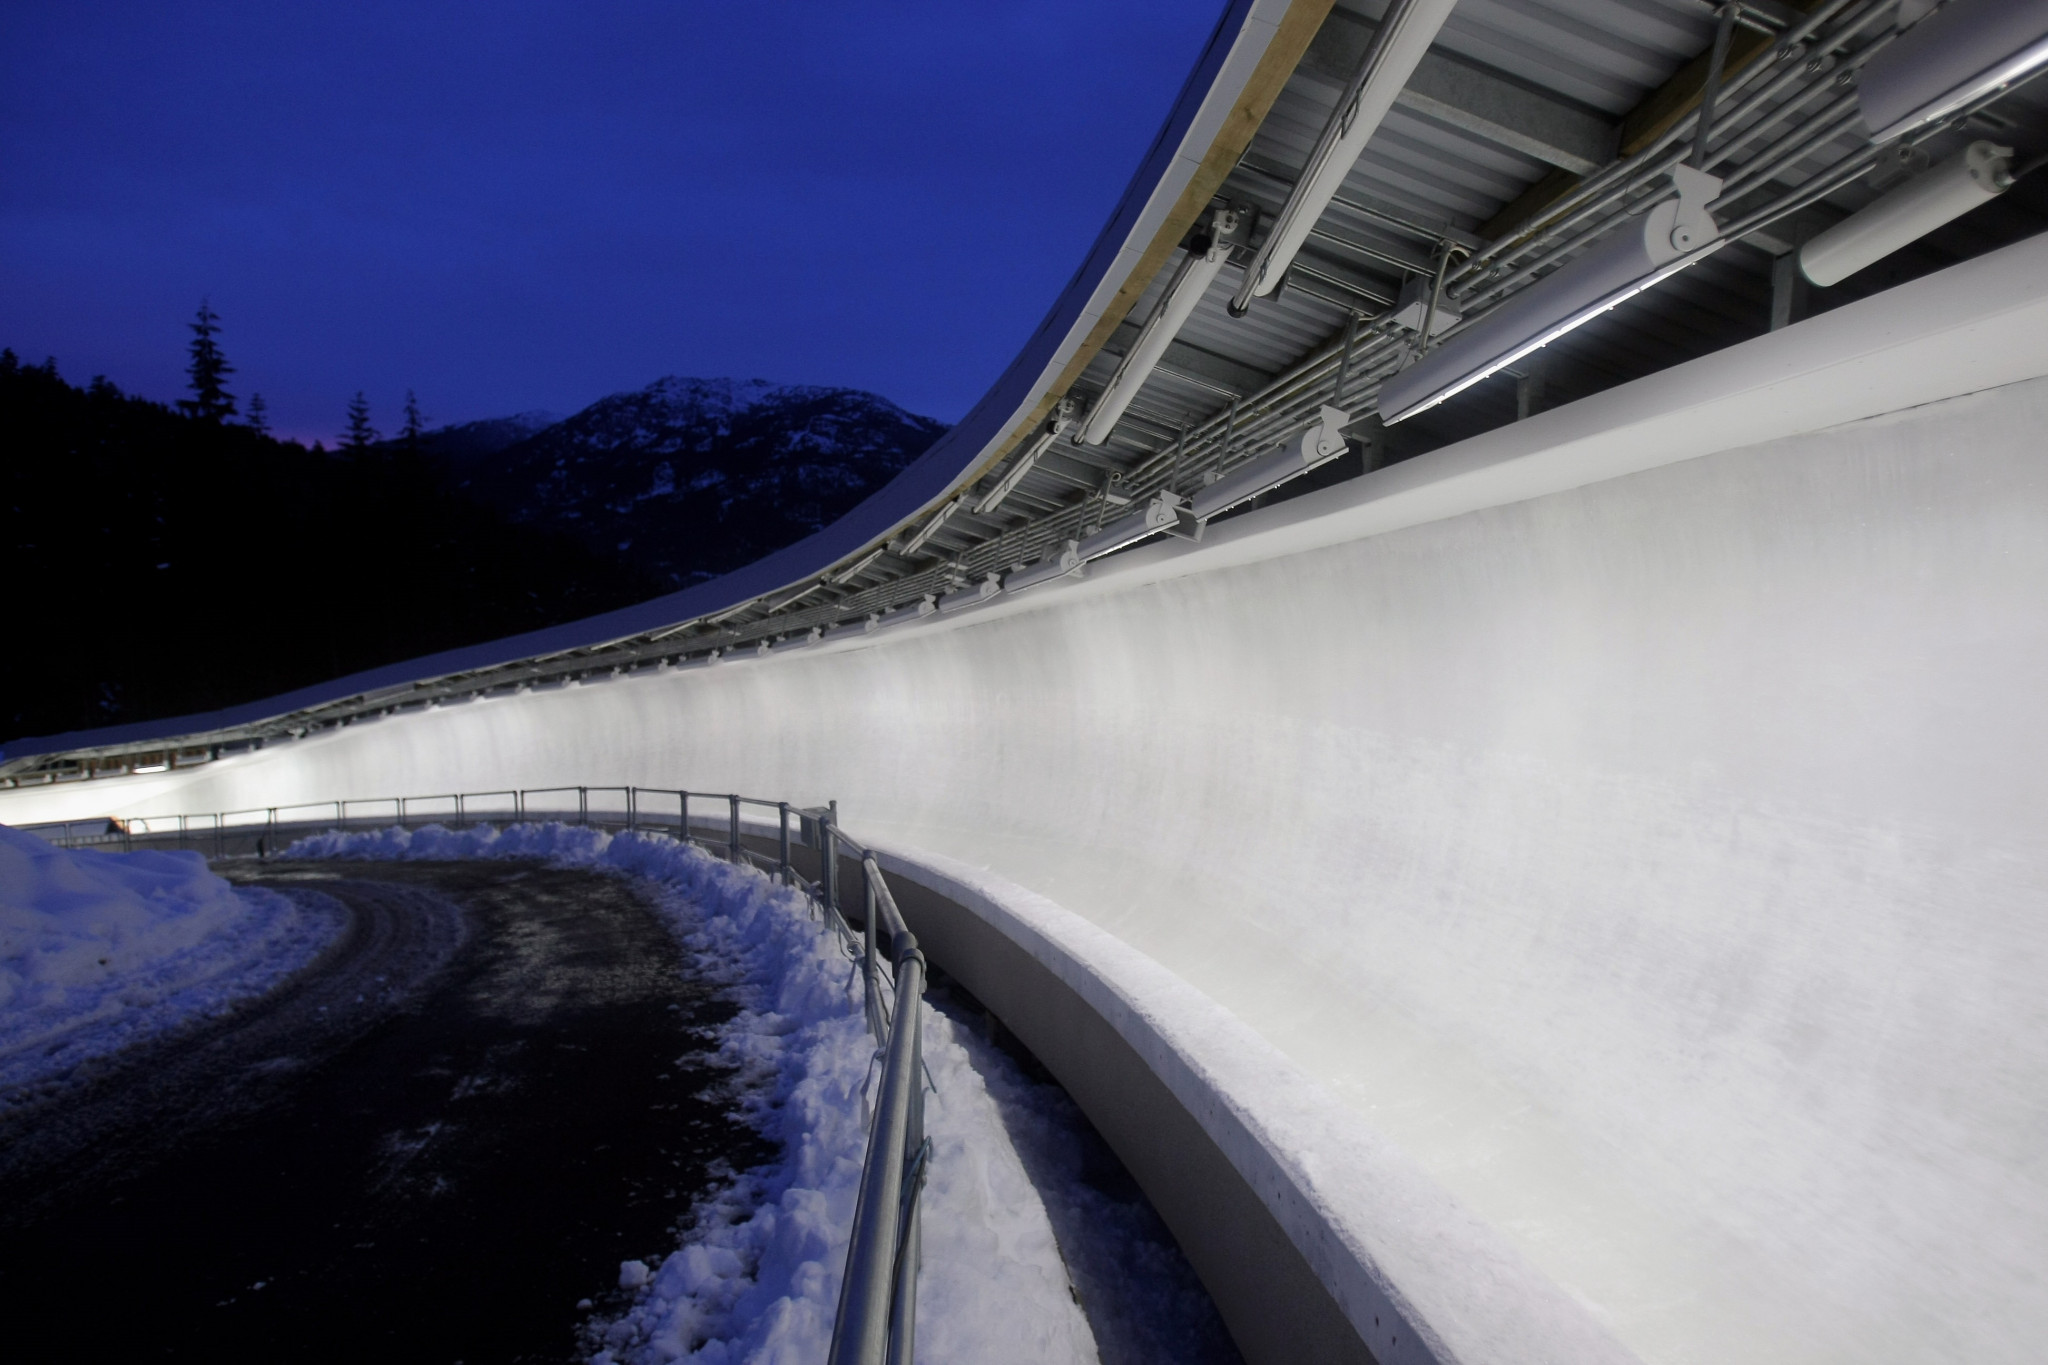 The Whistler Sliding Centre is among the venues that could be used for the Winter Olympics in Vancouver ©Getty Images